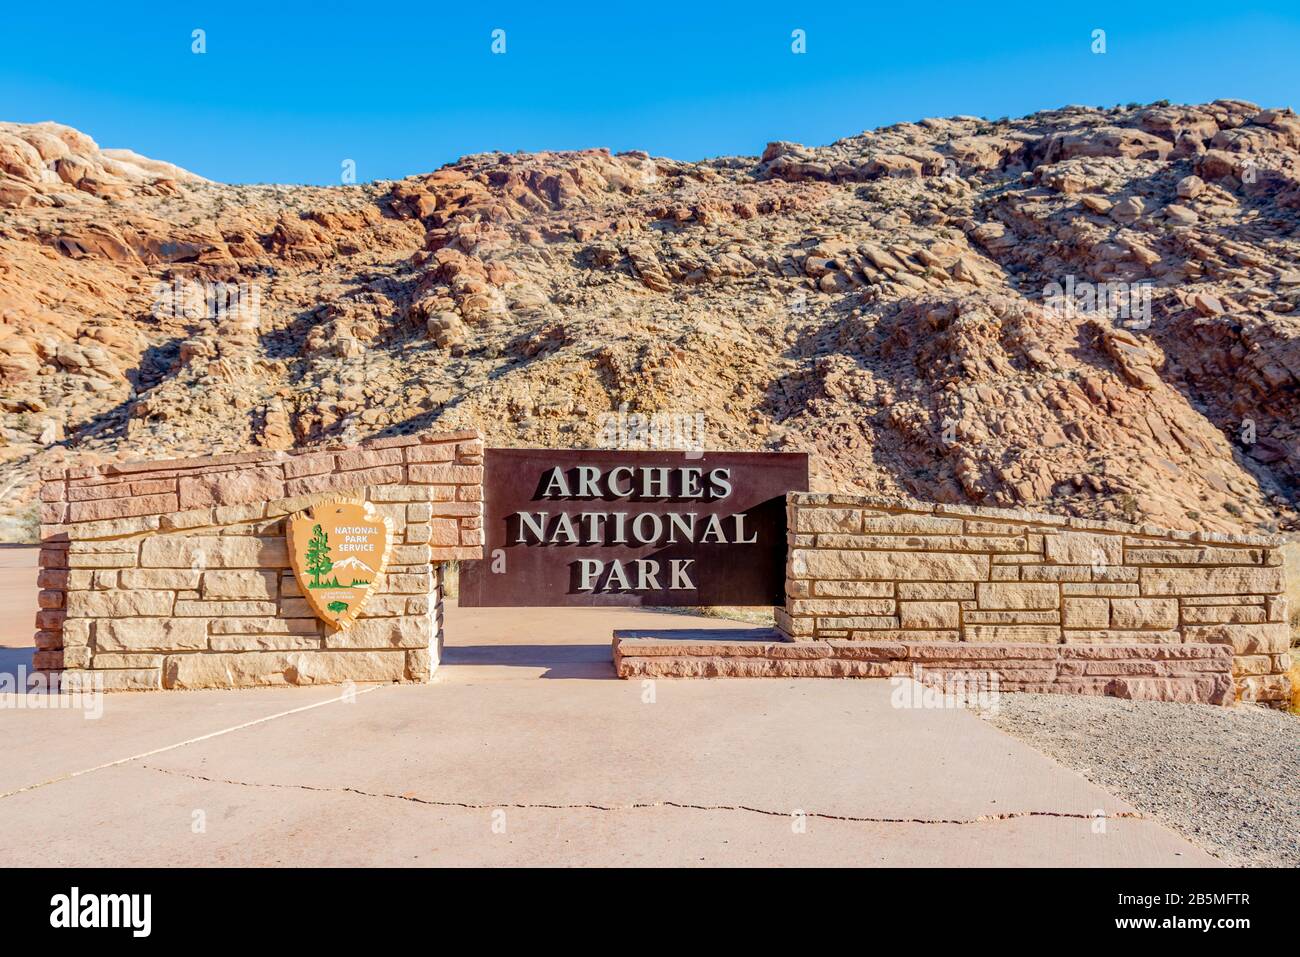 Entrance sign for Arches National Park in Moab, Utah USA. Stock Photo